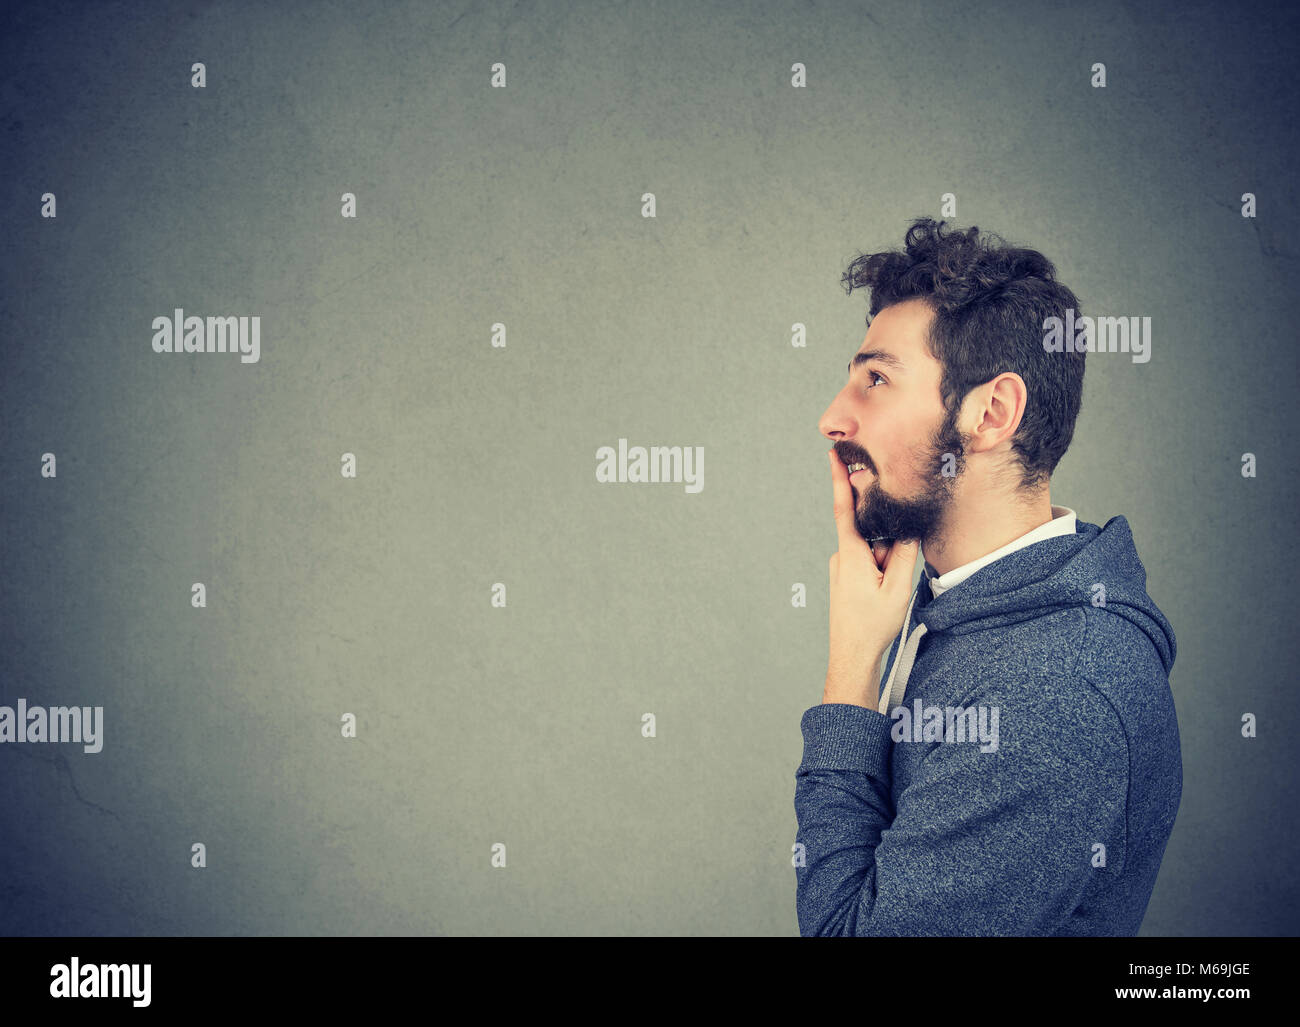 Side view of casual happy young man thinking on problem looking away in concentration on gray. Stock Photo